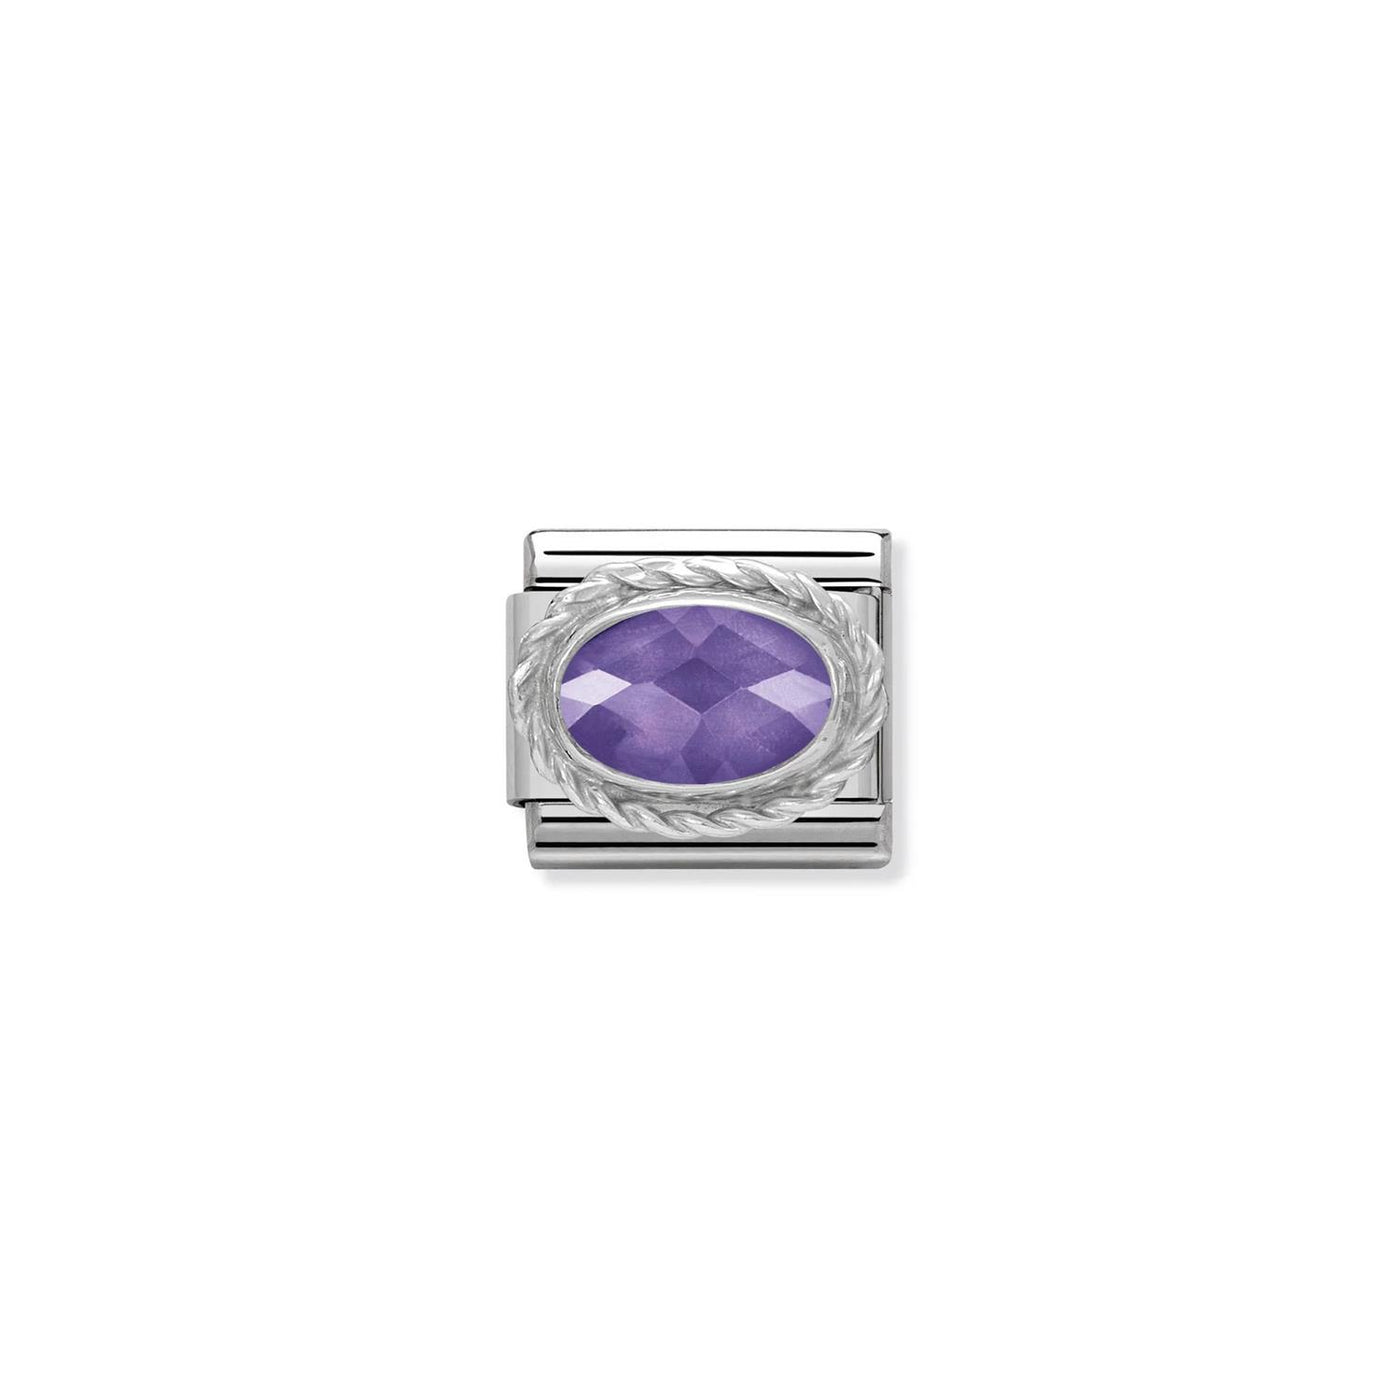 Faceted CZ 925 sterling silver setting and CZ Purple